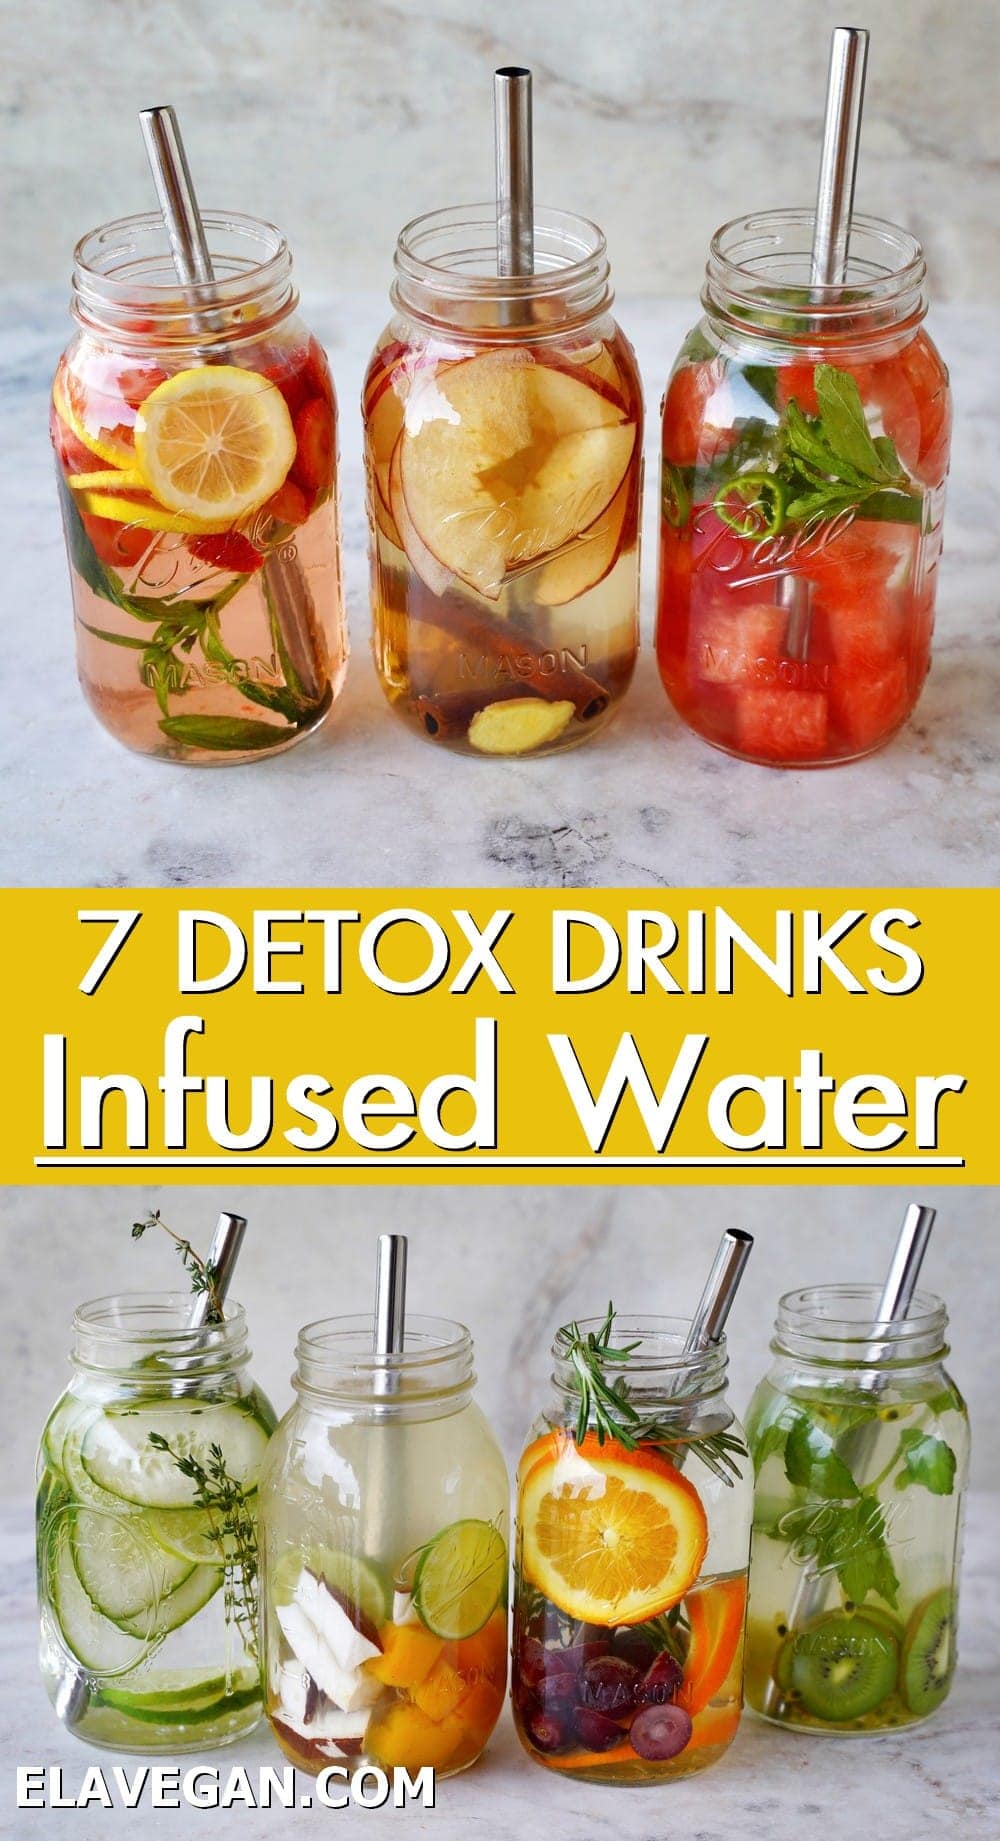 Pinterest Collage 7 detox drinks infused water